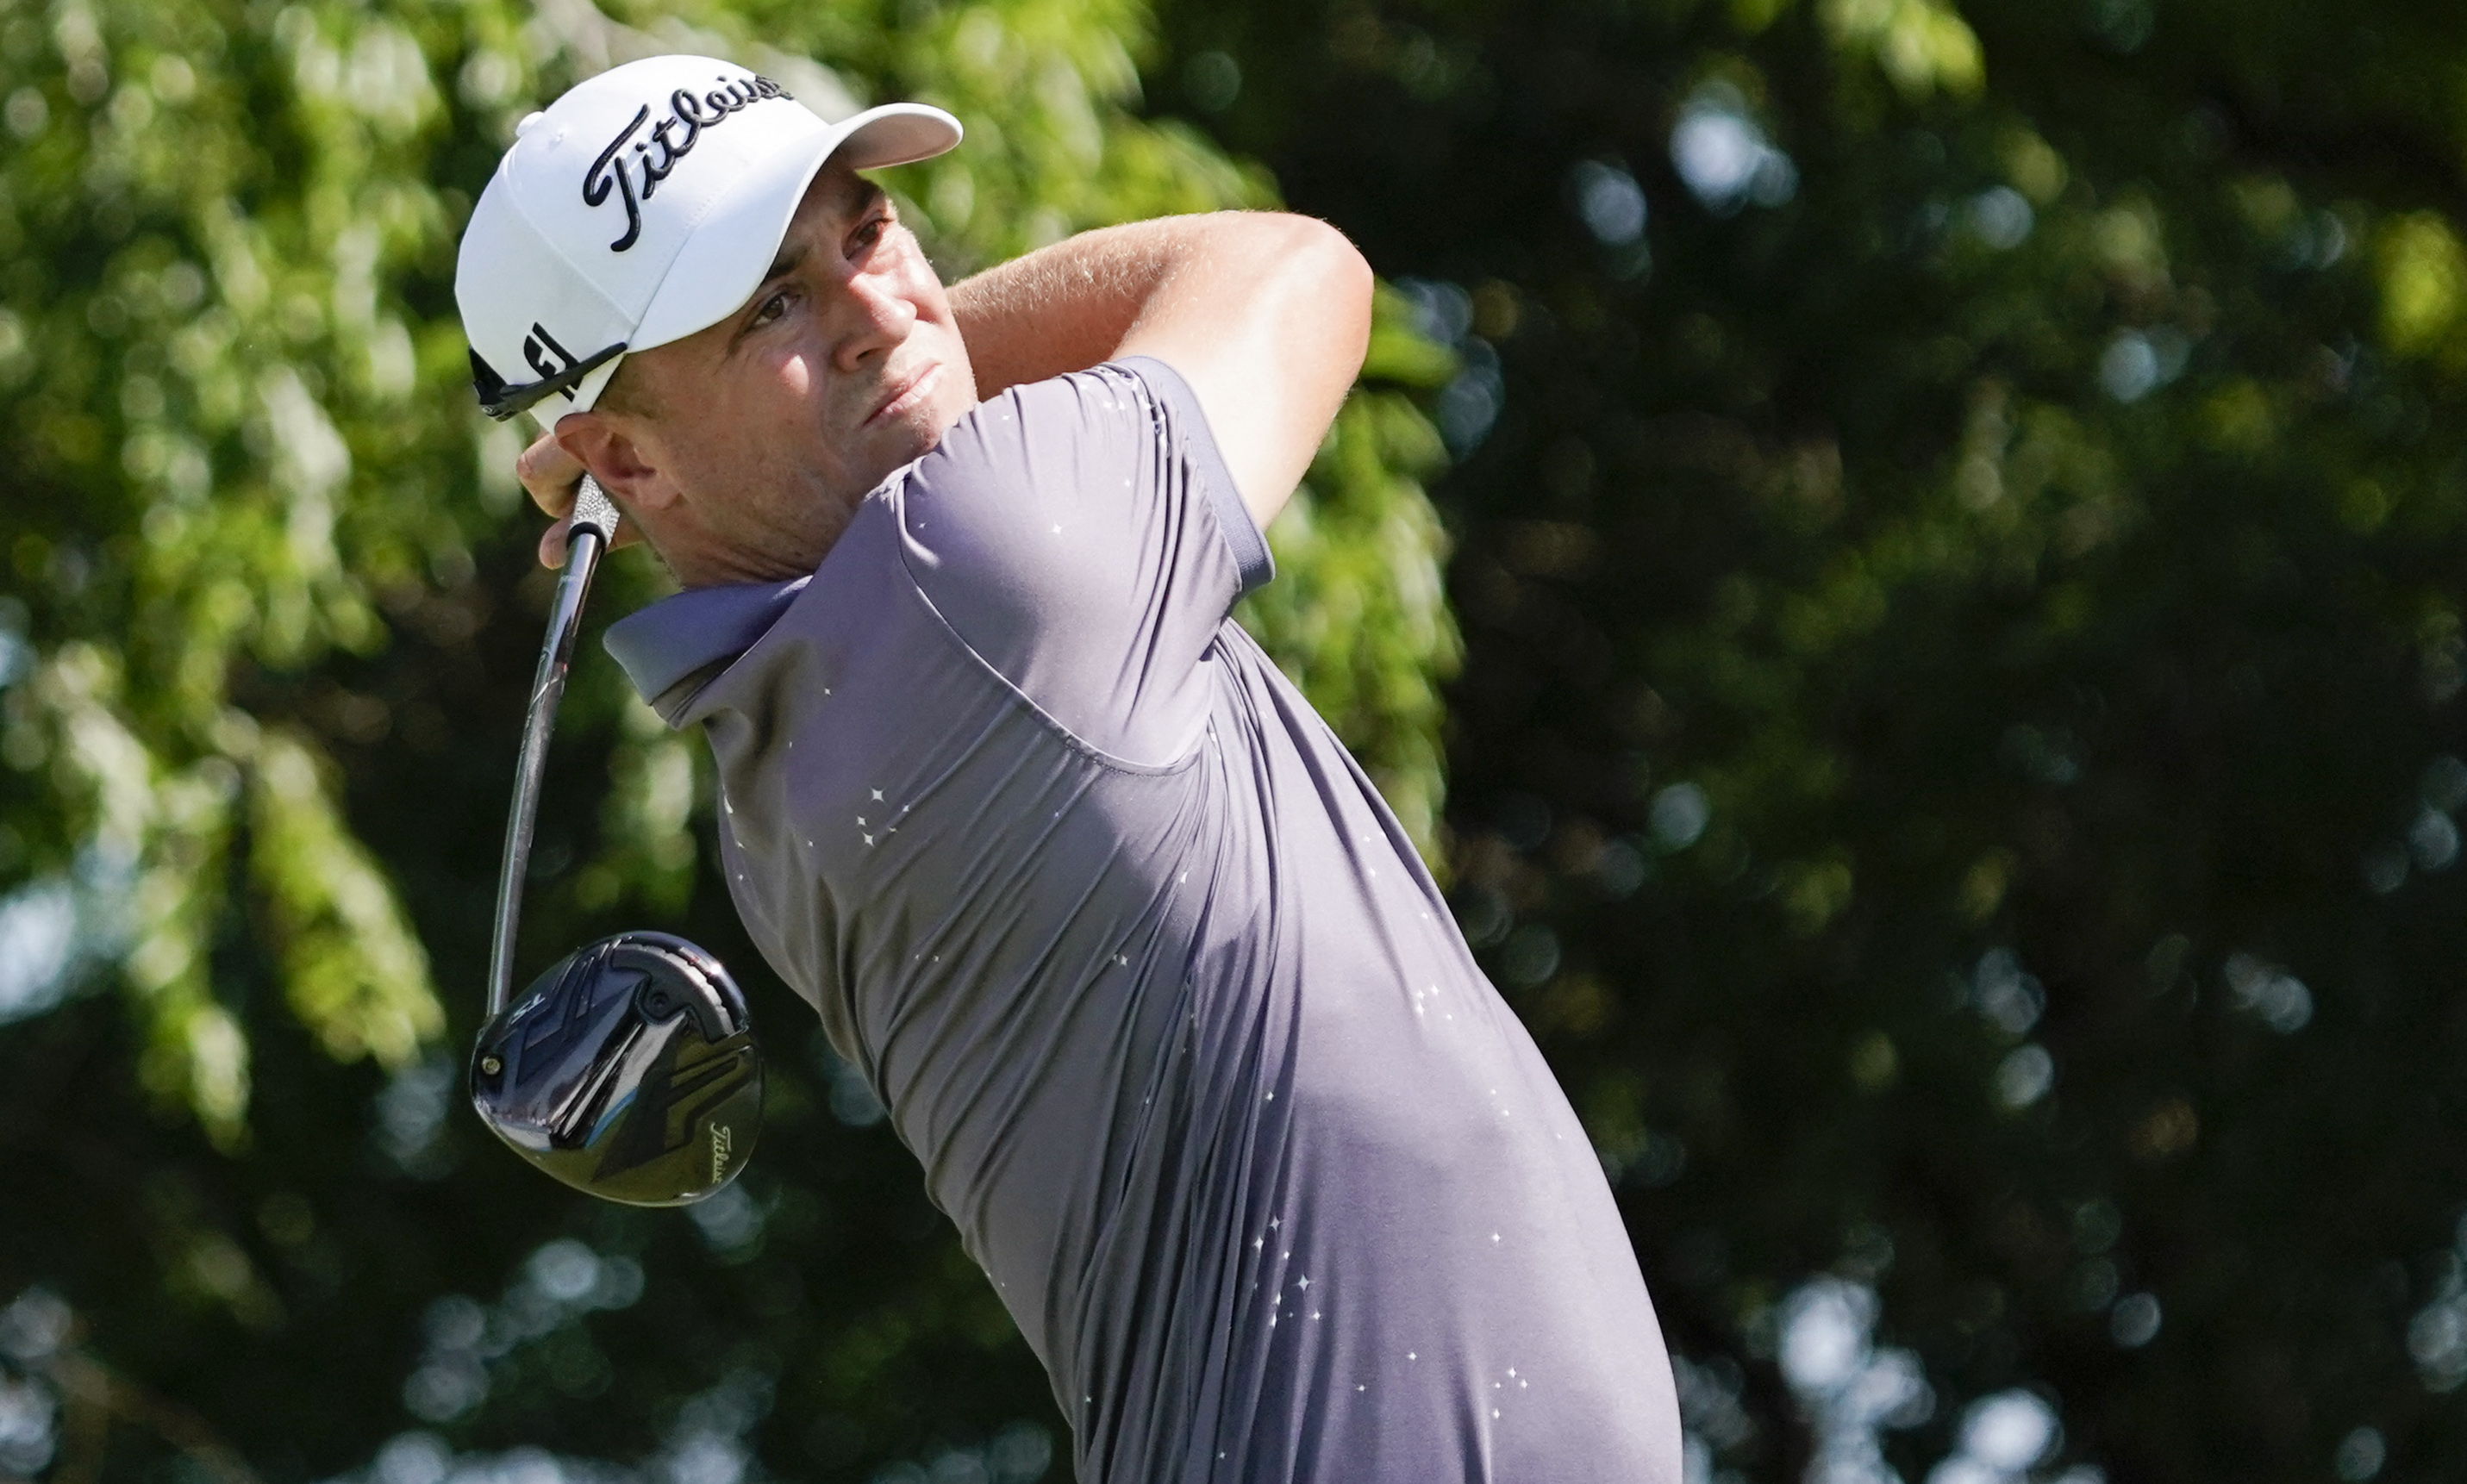 Justin Thomas on Sunday at AT&T Byron Nelson: "14-under is EXTREMELY  doable" | GolfMagic